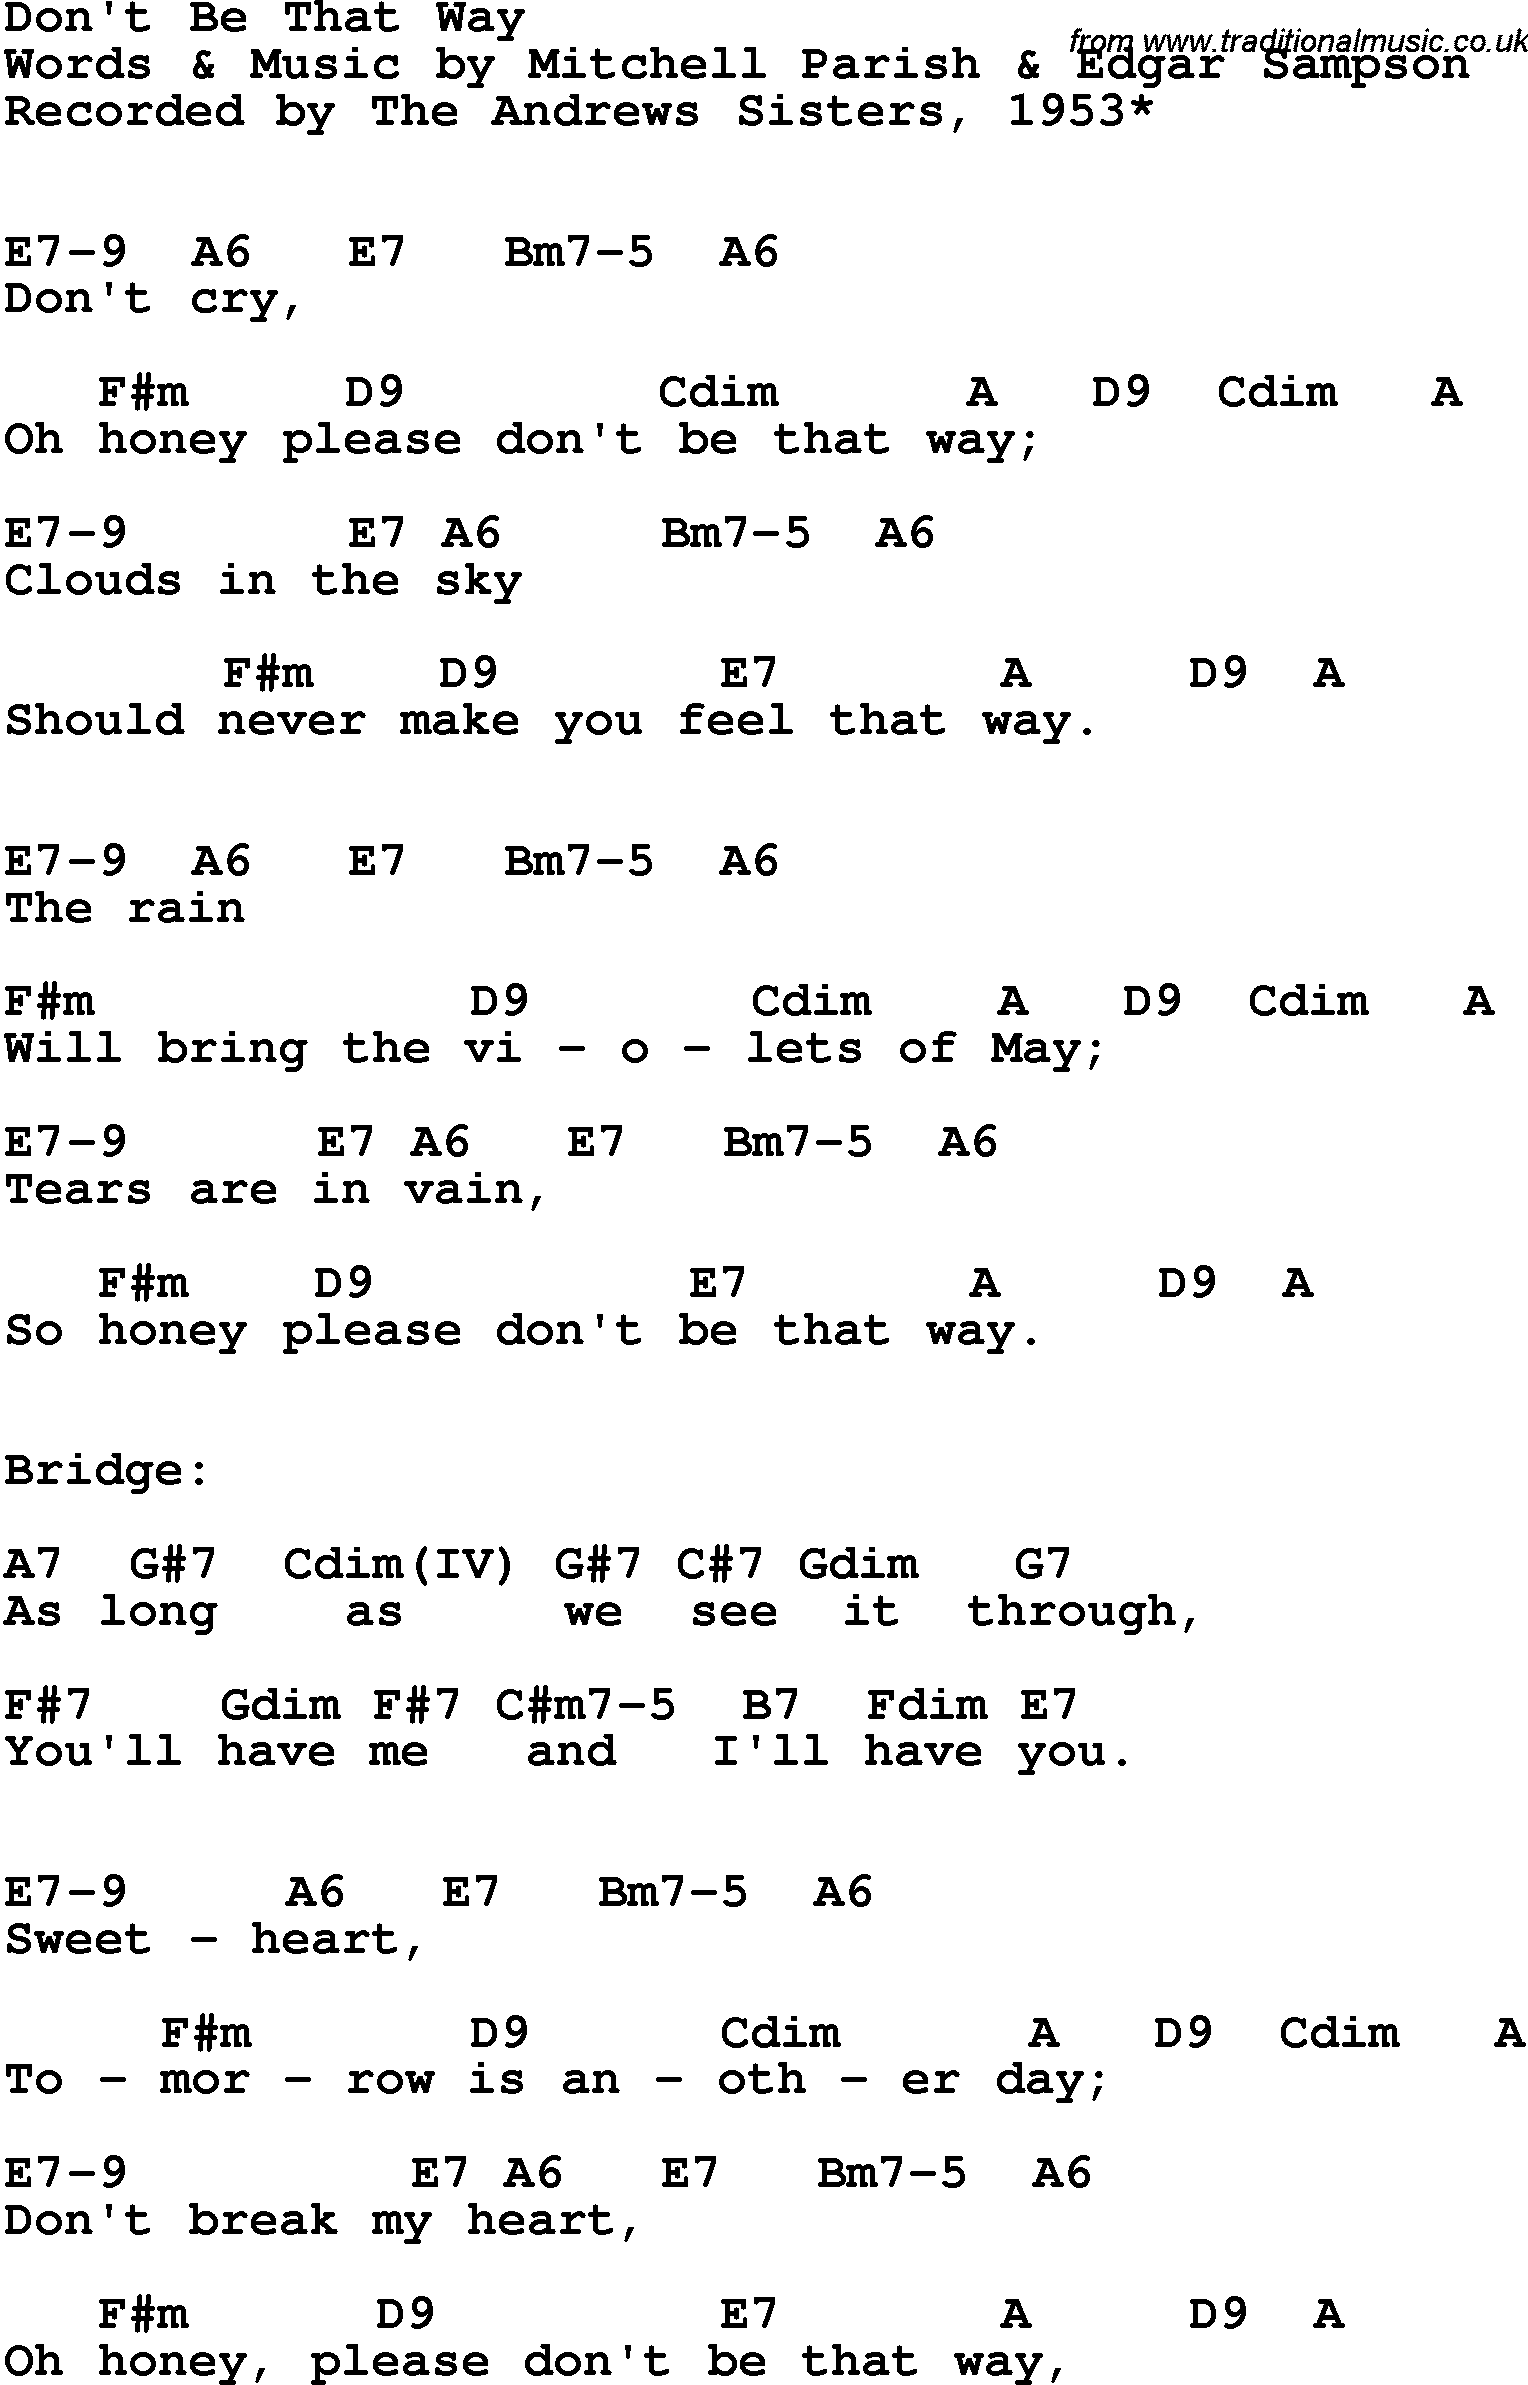 Song Lyrics with guitar chords for Don't Be That Way - The Andrews Sisters, 1953